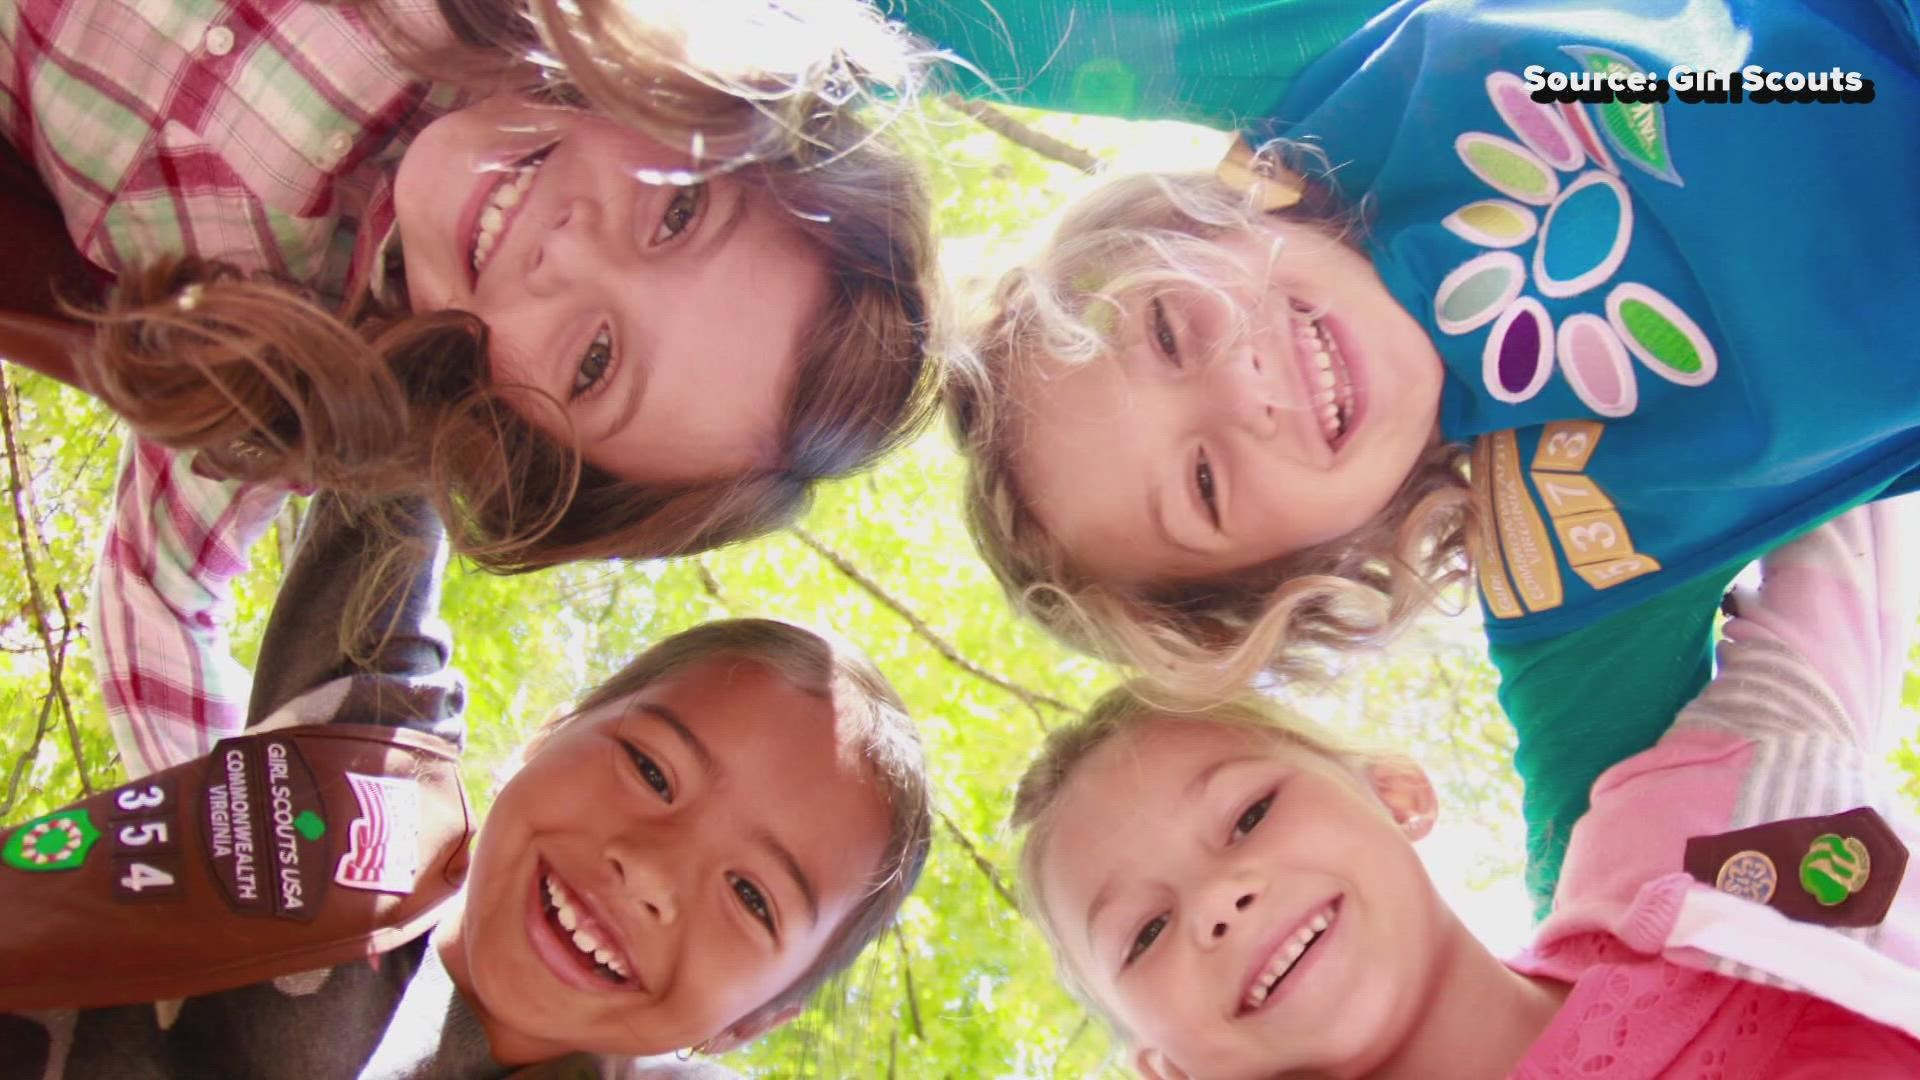 Girl Scouts' camp provides outdoor education, friendships, and developmental skills.